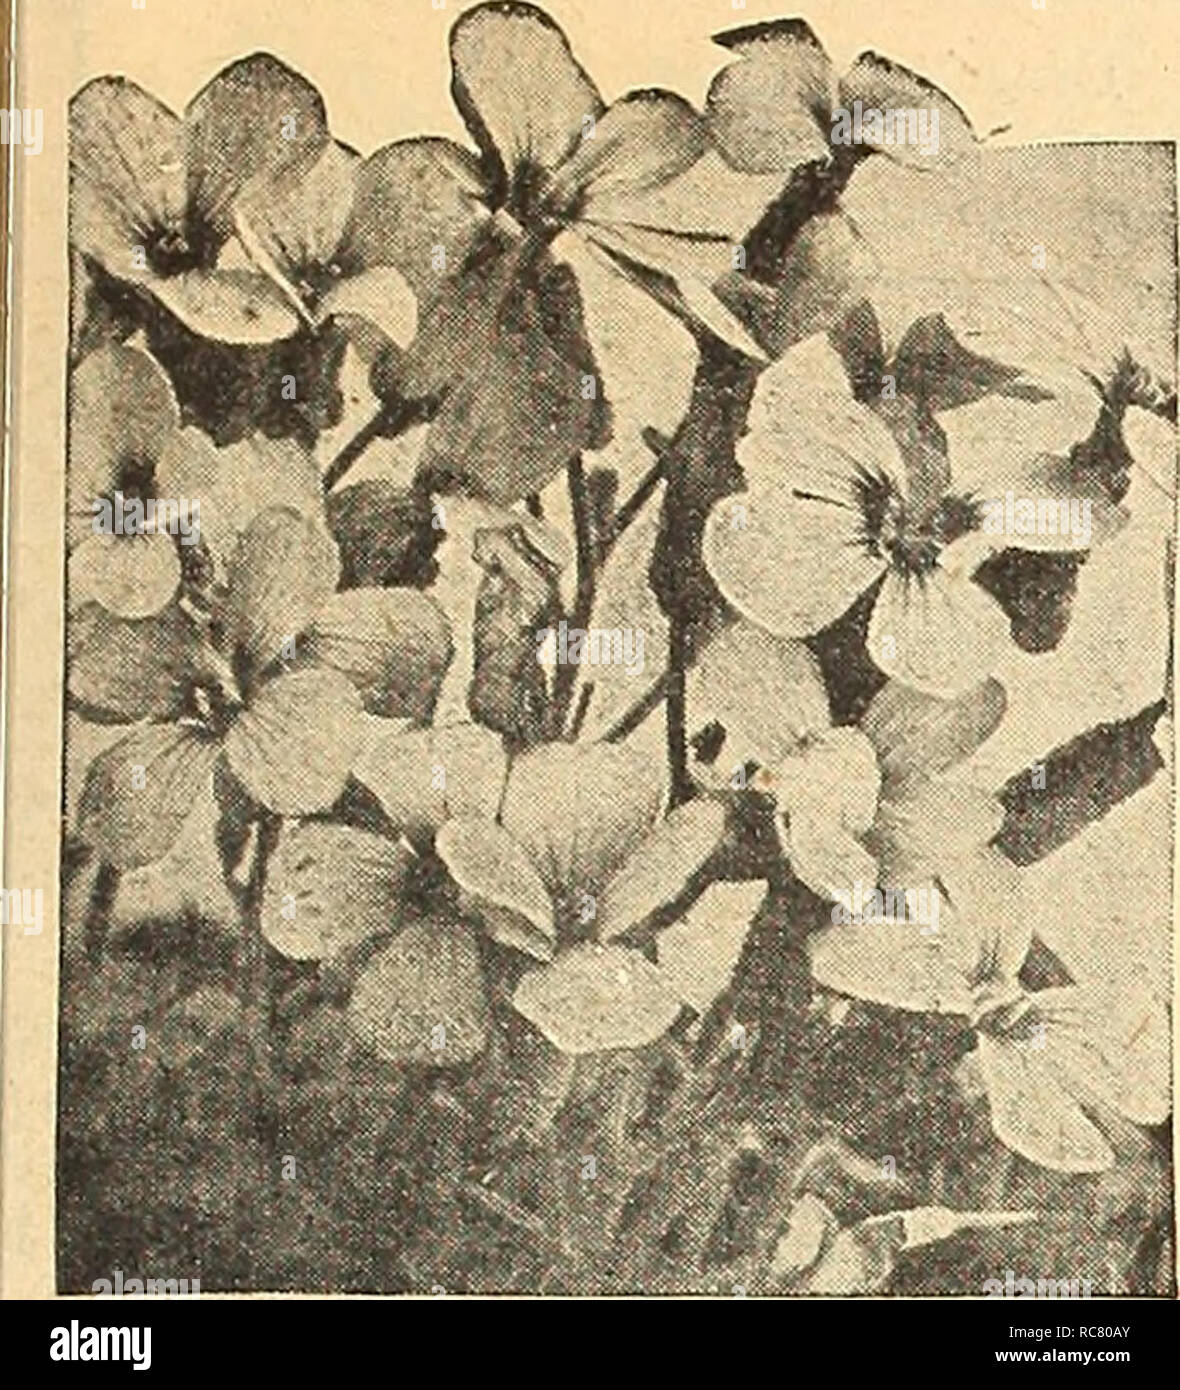 . Dreer's garden book for 1946 : faithful for over a century. Seeds Catalogs; Nursery stock Catalogs; Gardening Equipment and supplies Catalogs; Flowers Seeds Catalogs; Vegetables Seeds Catalogs; Fruit Seeds Catalogs. Aubrietia, Large-Flowering Hybrids Aubrietia r^p] a Rainbow Rock Cress A showy spring-flowering perennial with silvery green foliage covered by attractive, large, and colorful blooms. 1406 Blood-Red. Very showy and coloi-ful. Pkt. ISc; large pkt. SOc. 1407 Bouganvillei. Impressive large blue flowers. Pkt. ISc; large pkt. SOc. 1408 Leichtlini. A very appealing carmine-rose shade.  Stock Photo